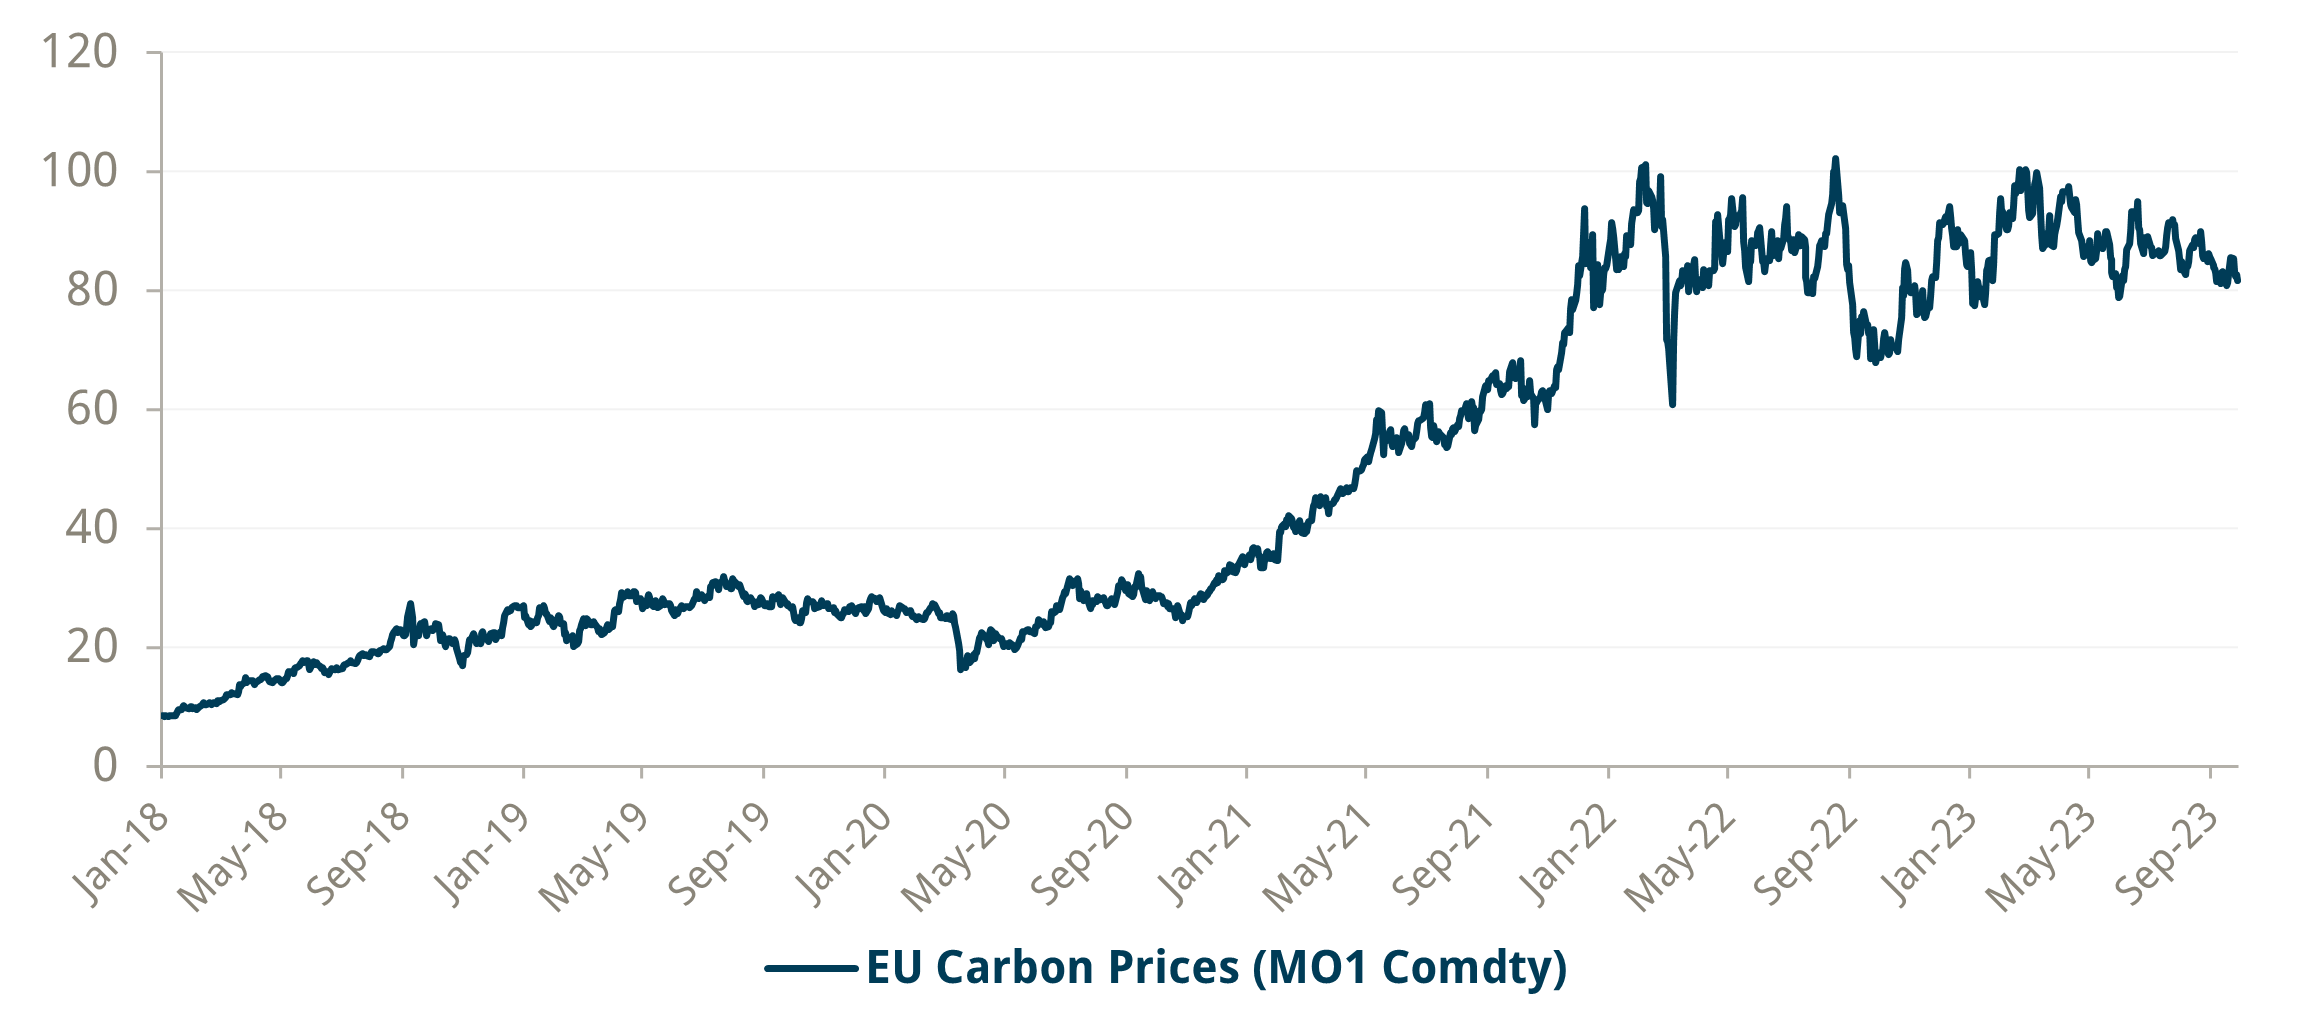 EU carbon allowances rallied from the March 2020 lows of EUR 15 to over EUR 100 per tonne